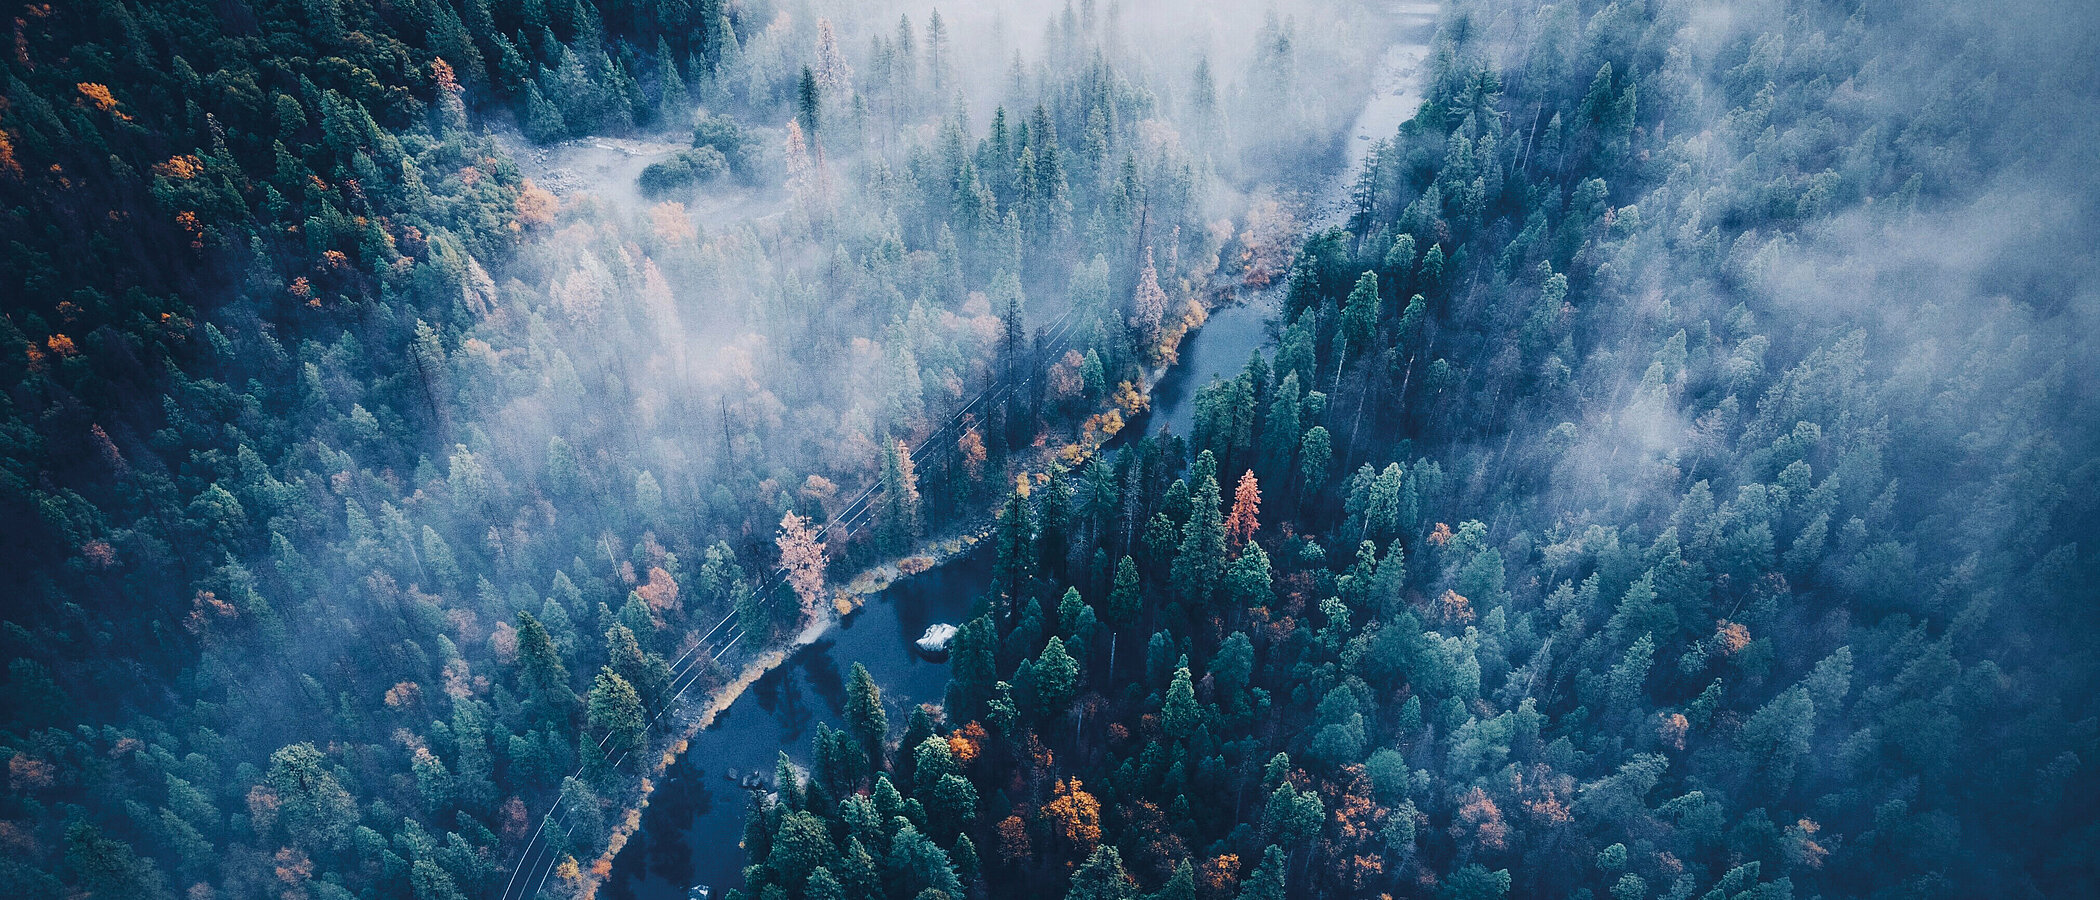 Forest fire from the bird's eye view